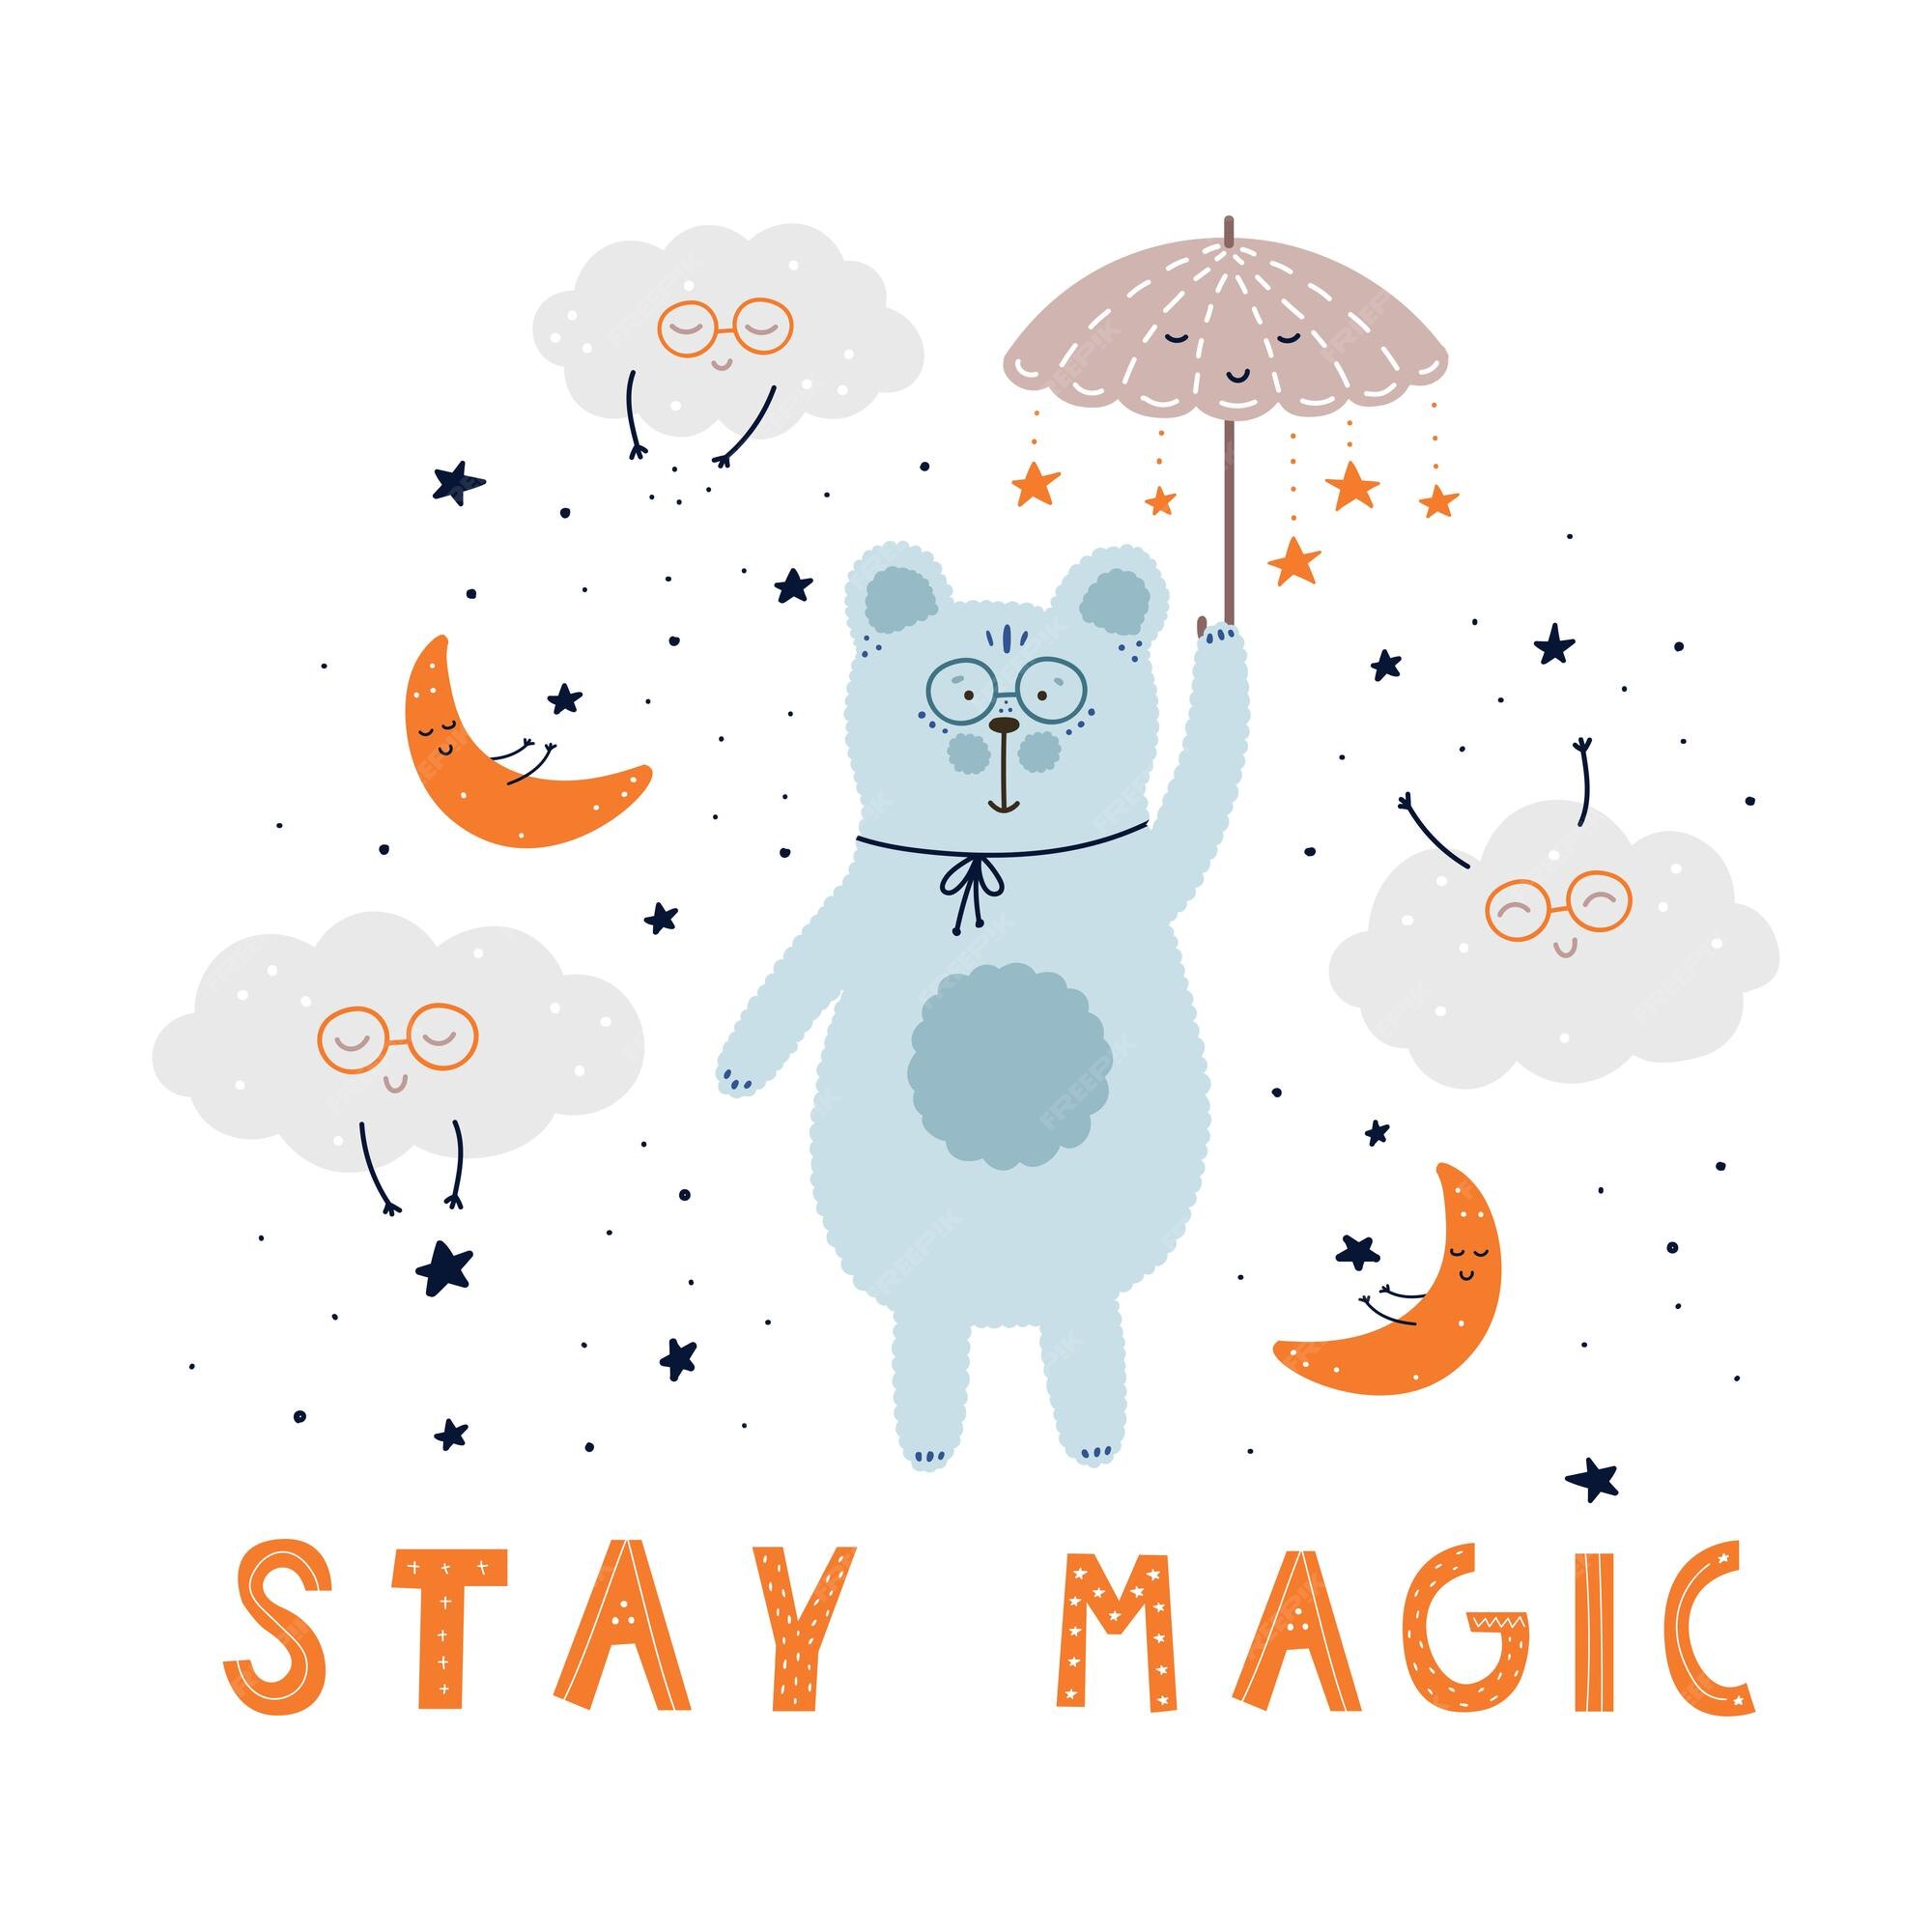 Premium Vector | Stay magic is a handdrawn children's poster with cartoon  characters and captions